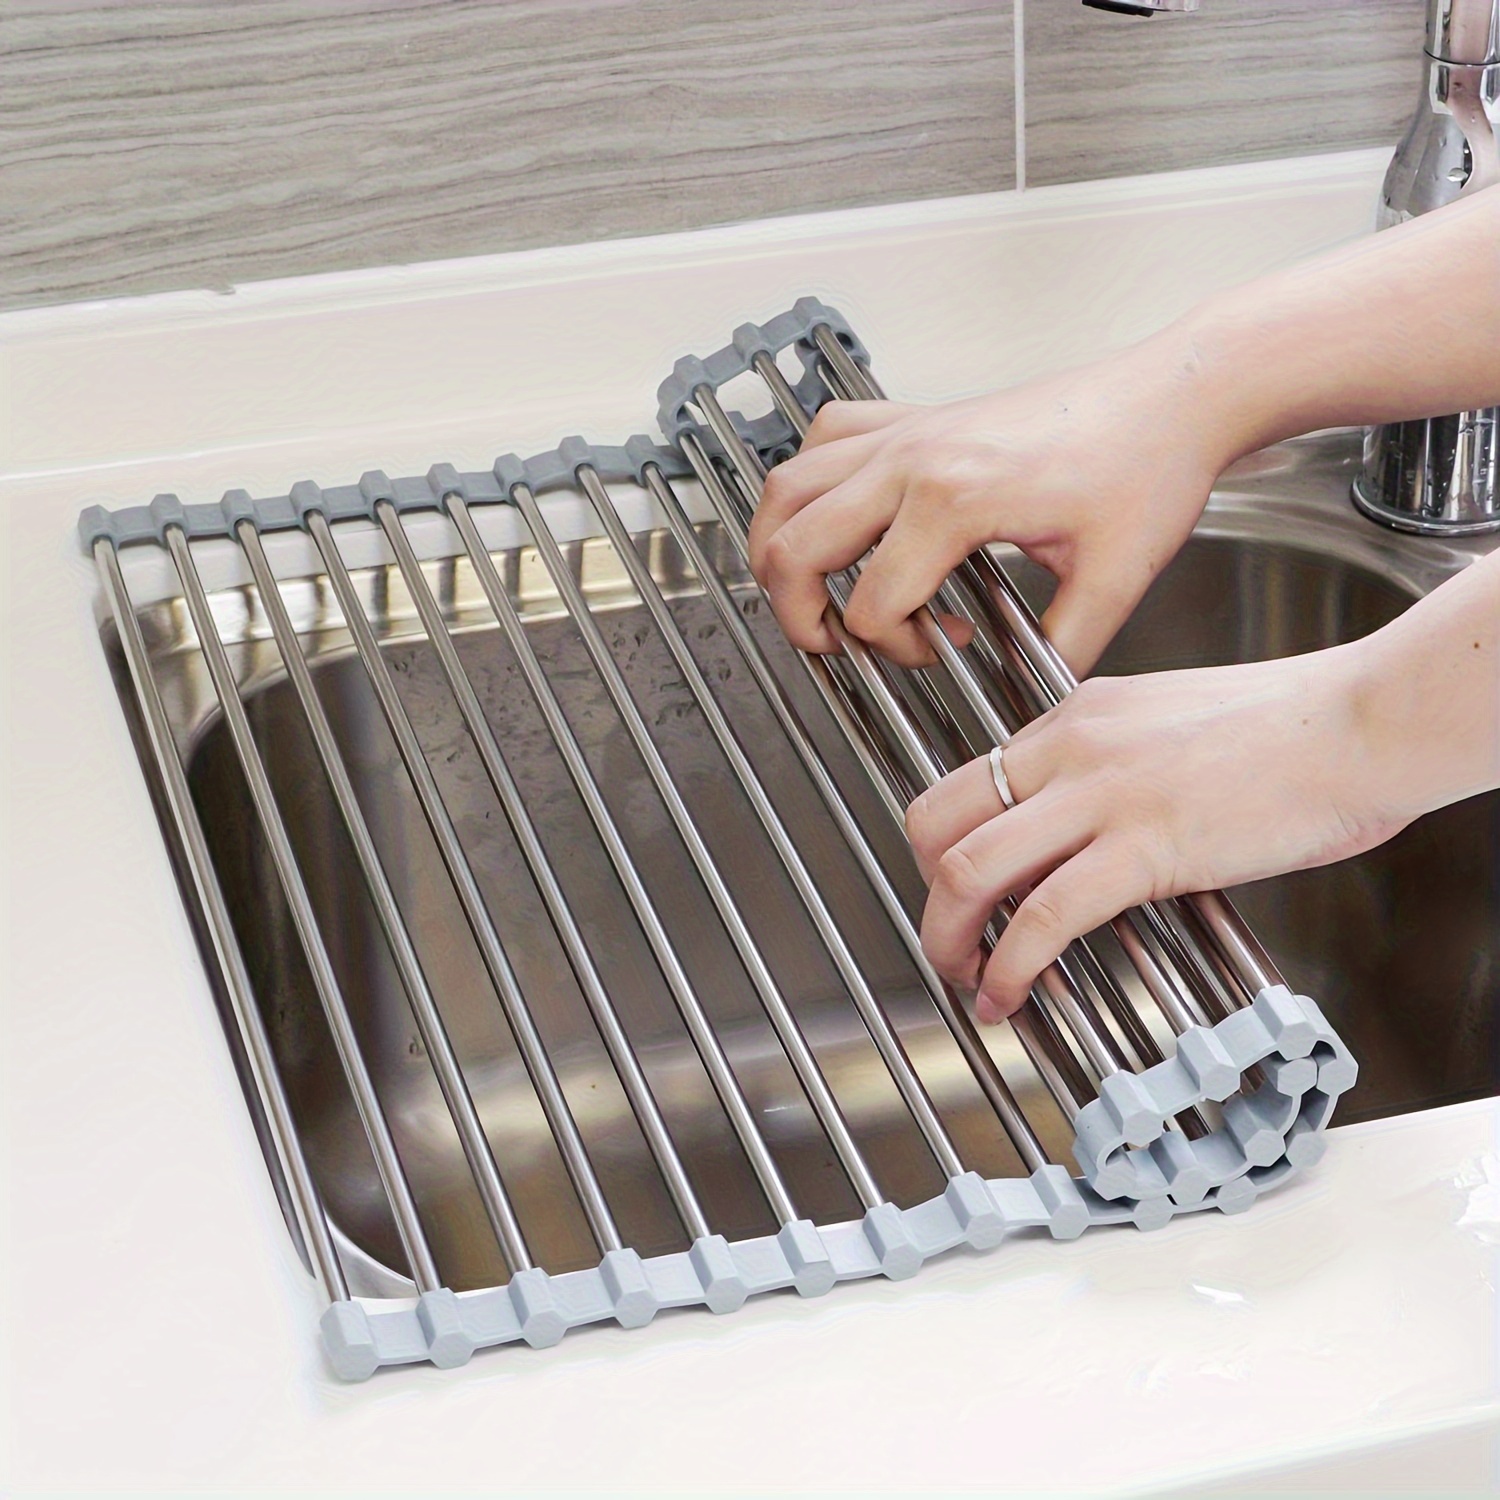 

1pc Stainless Steel Roll-up Dish Drying Rack - Portable, Foldable Sink Drainer Organizer For Kitchen Accessories